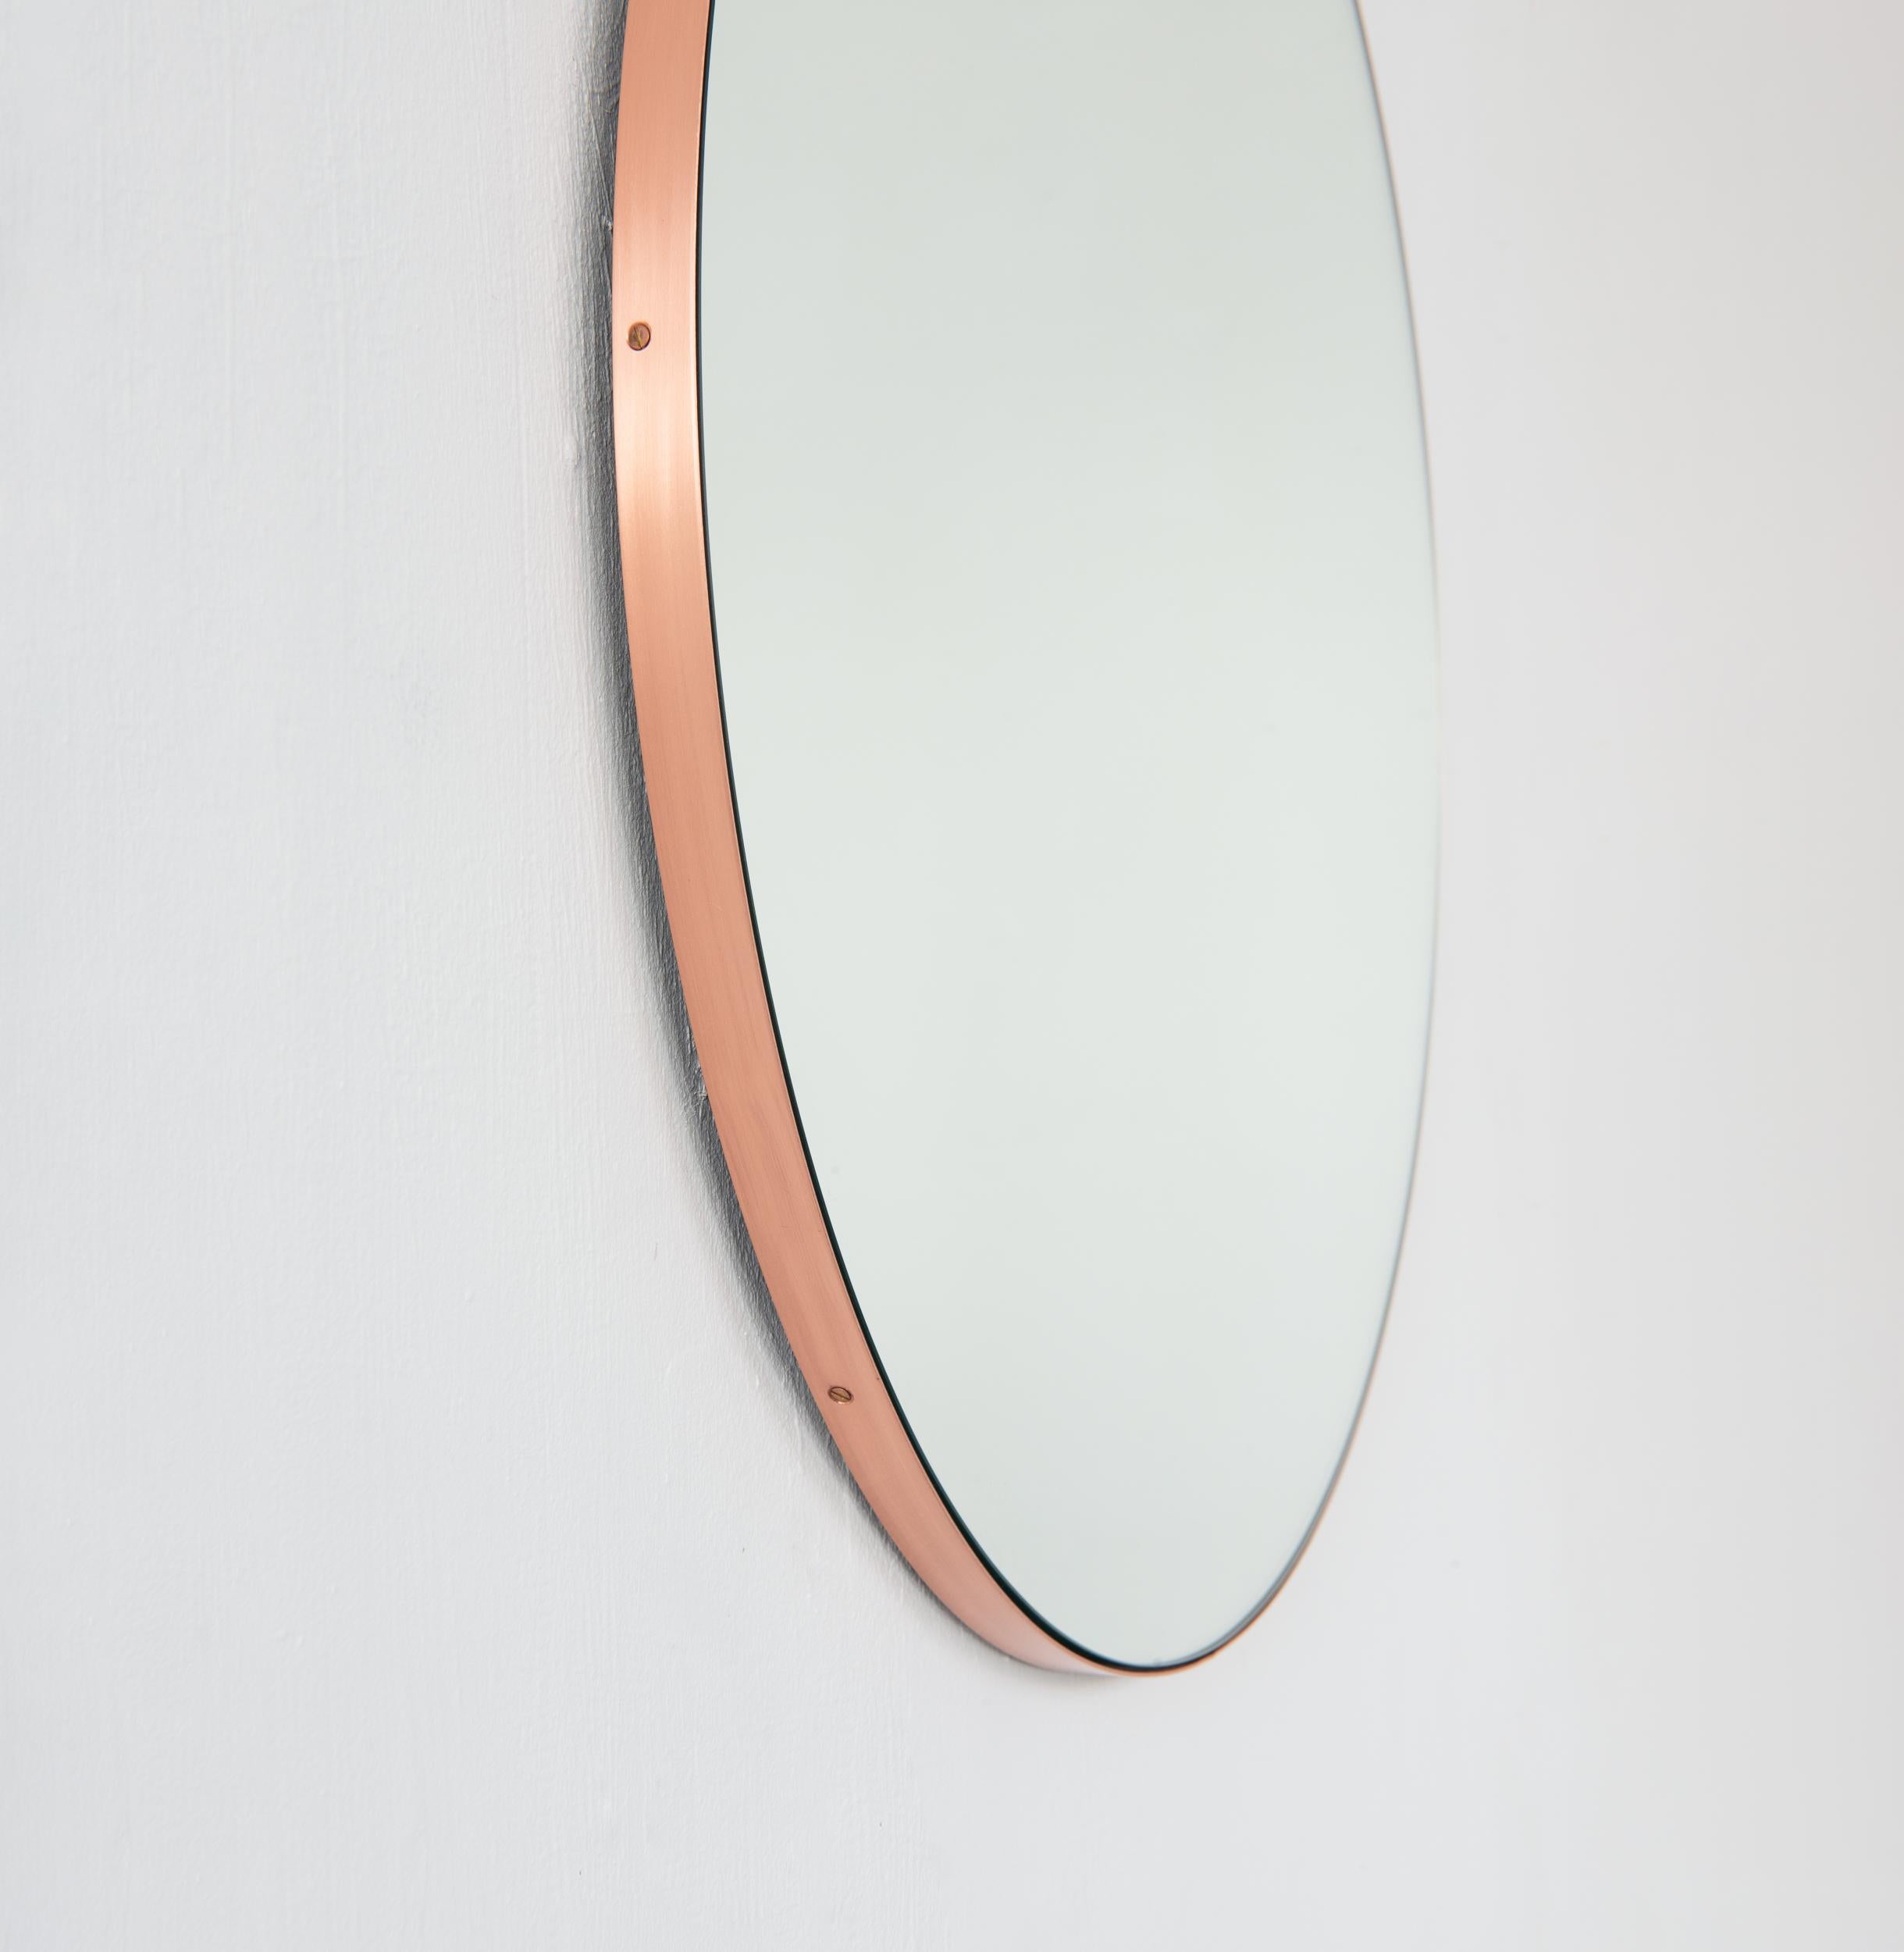 Brushed Orbis Round Modern Minimalist Handcrafted Mirror with Copper Frame, Large For Sale